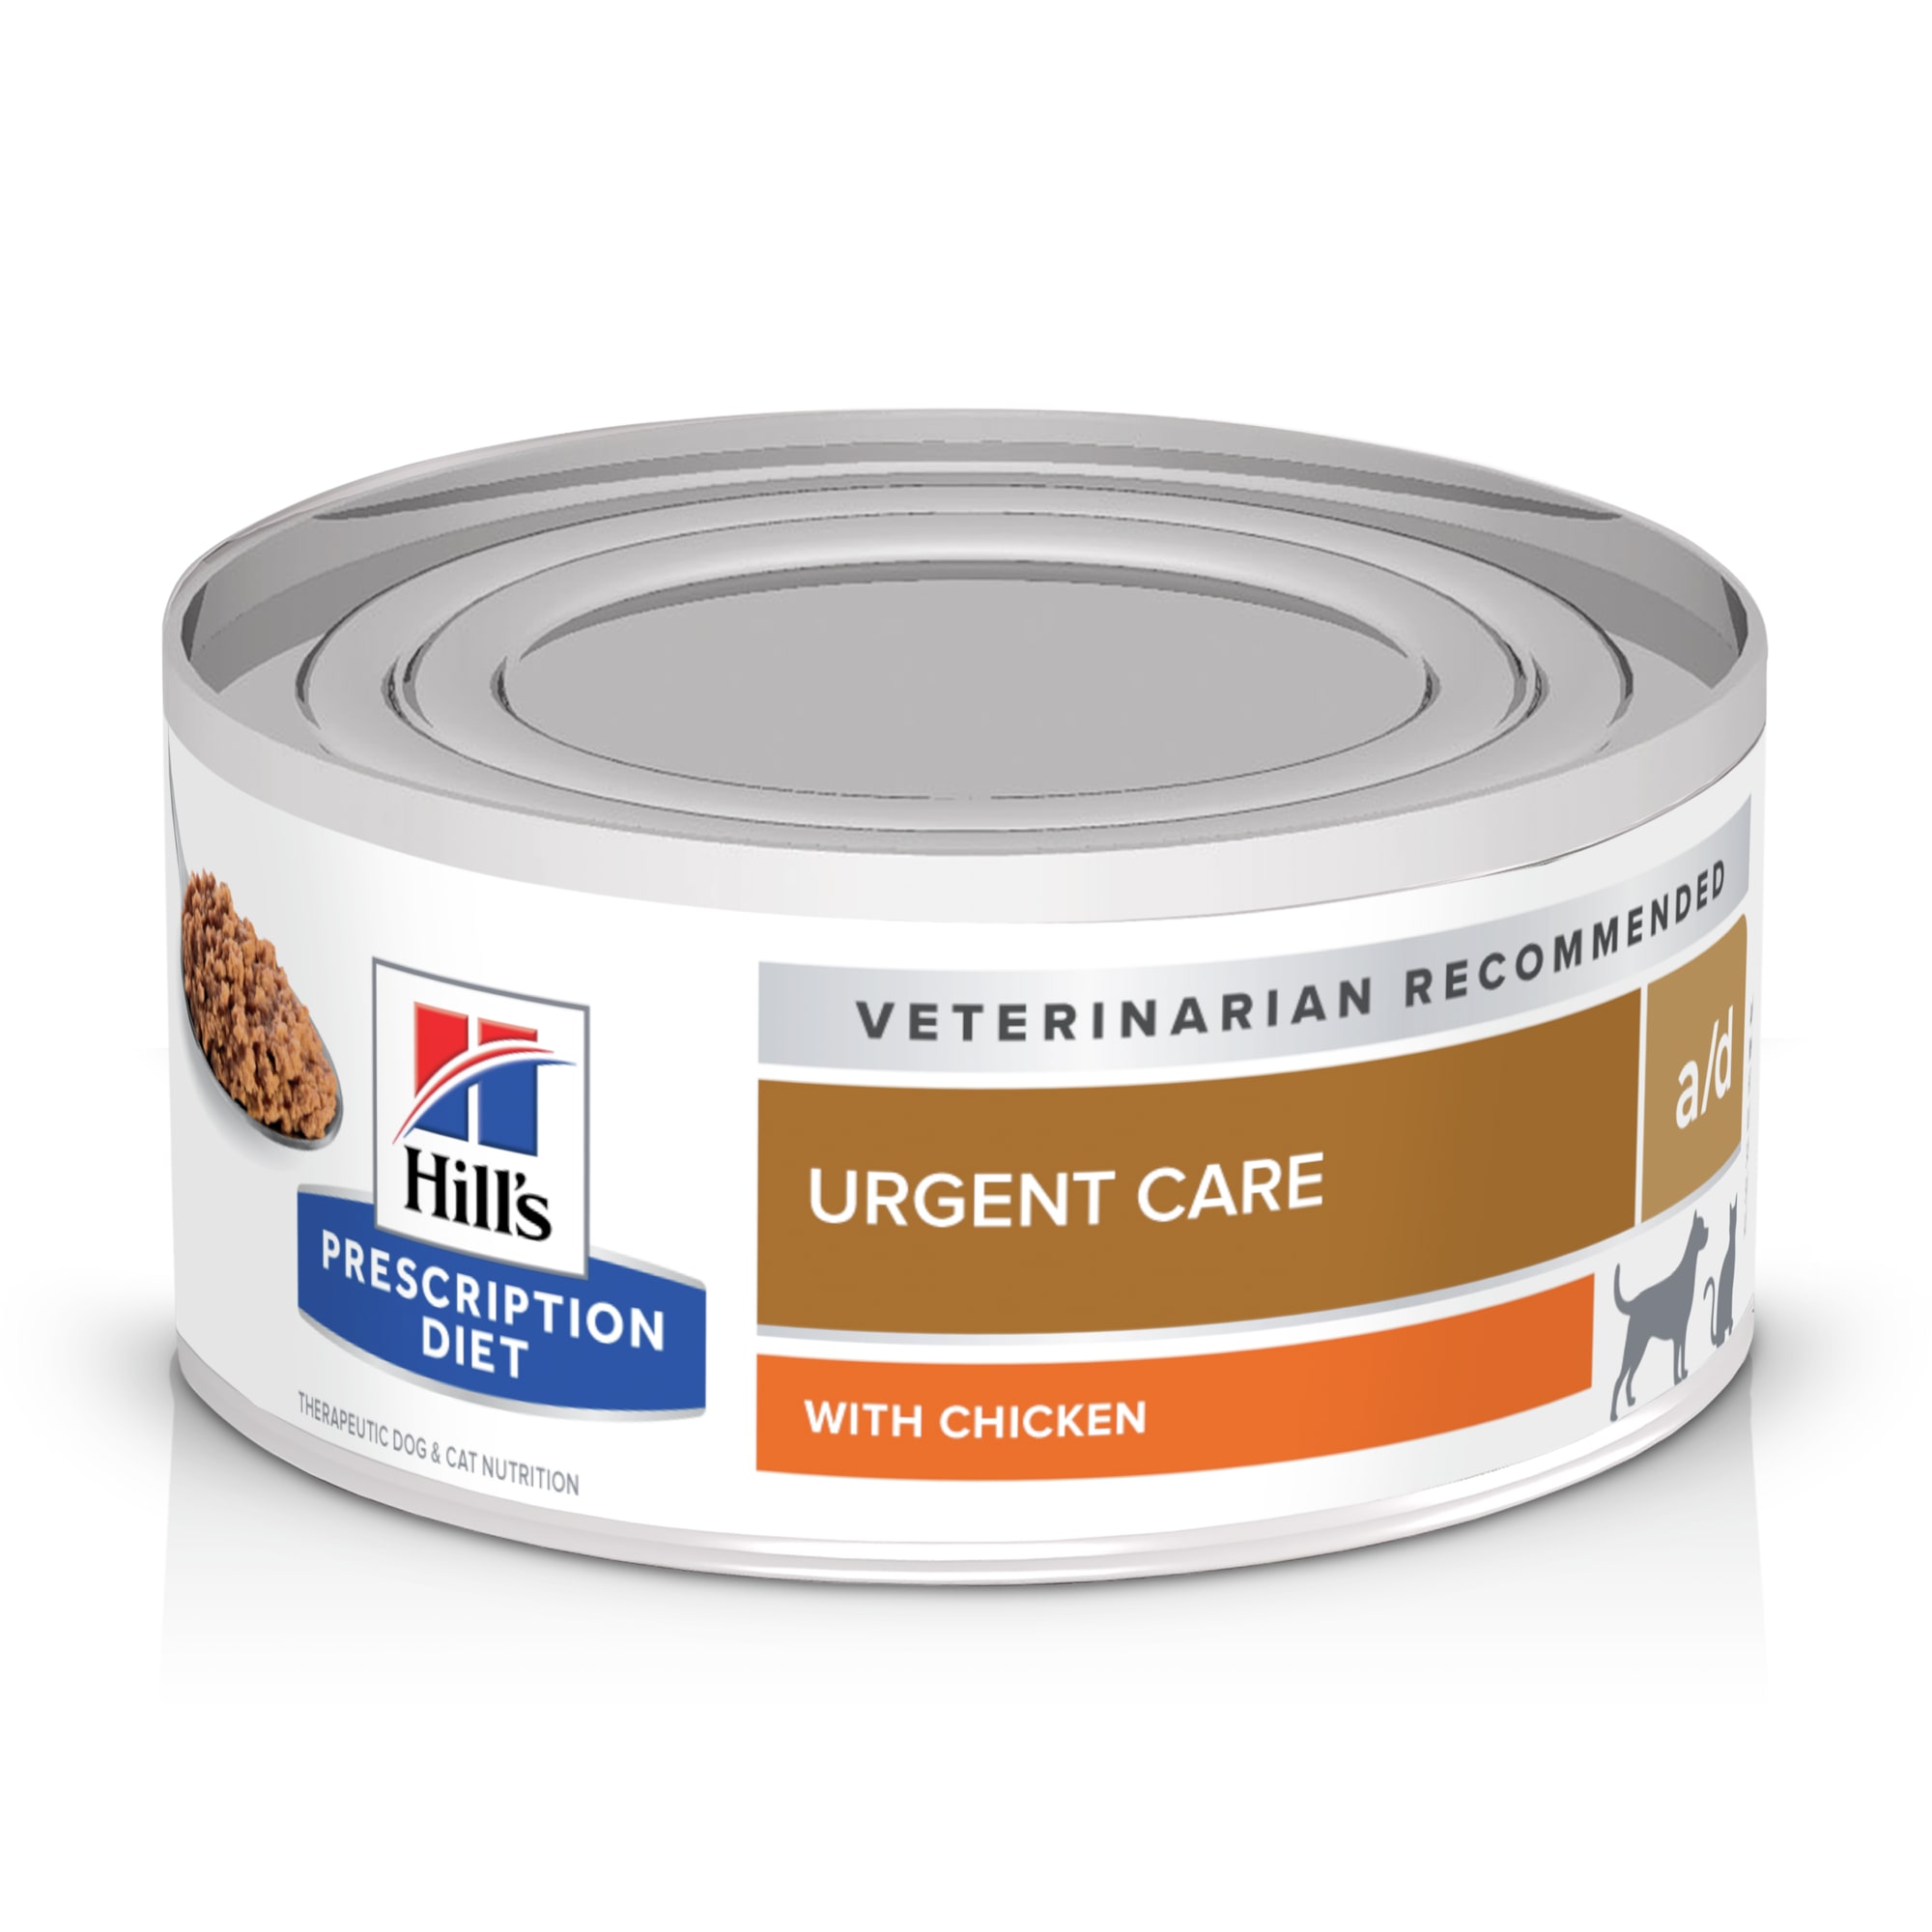 Hill's Prescription Diet a/d Urgent Care Canned Dog and